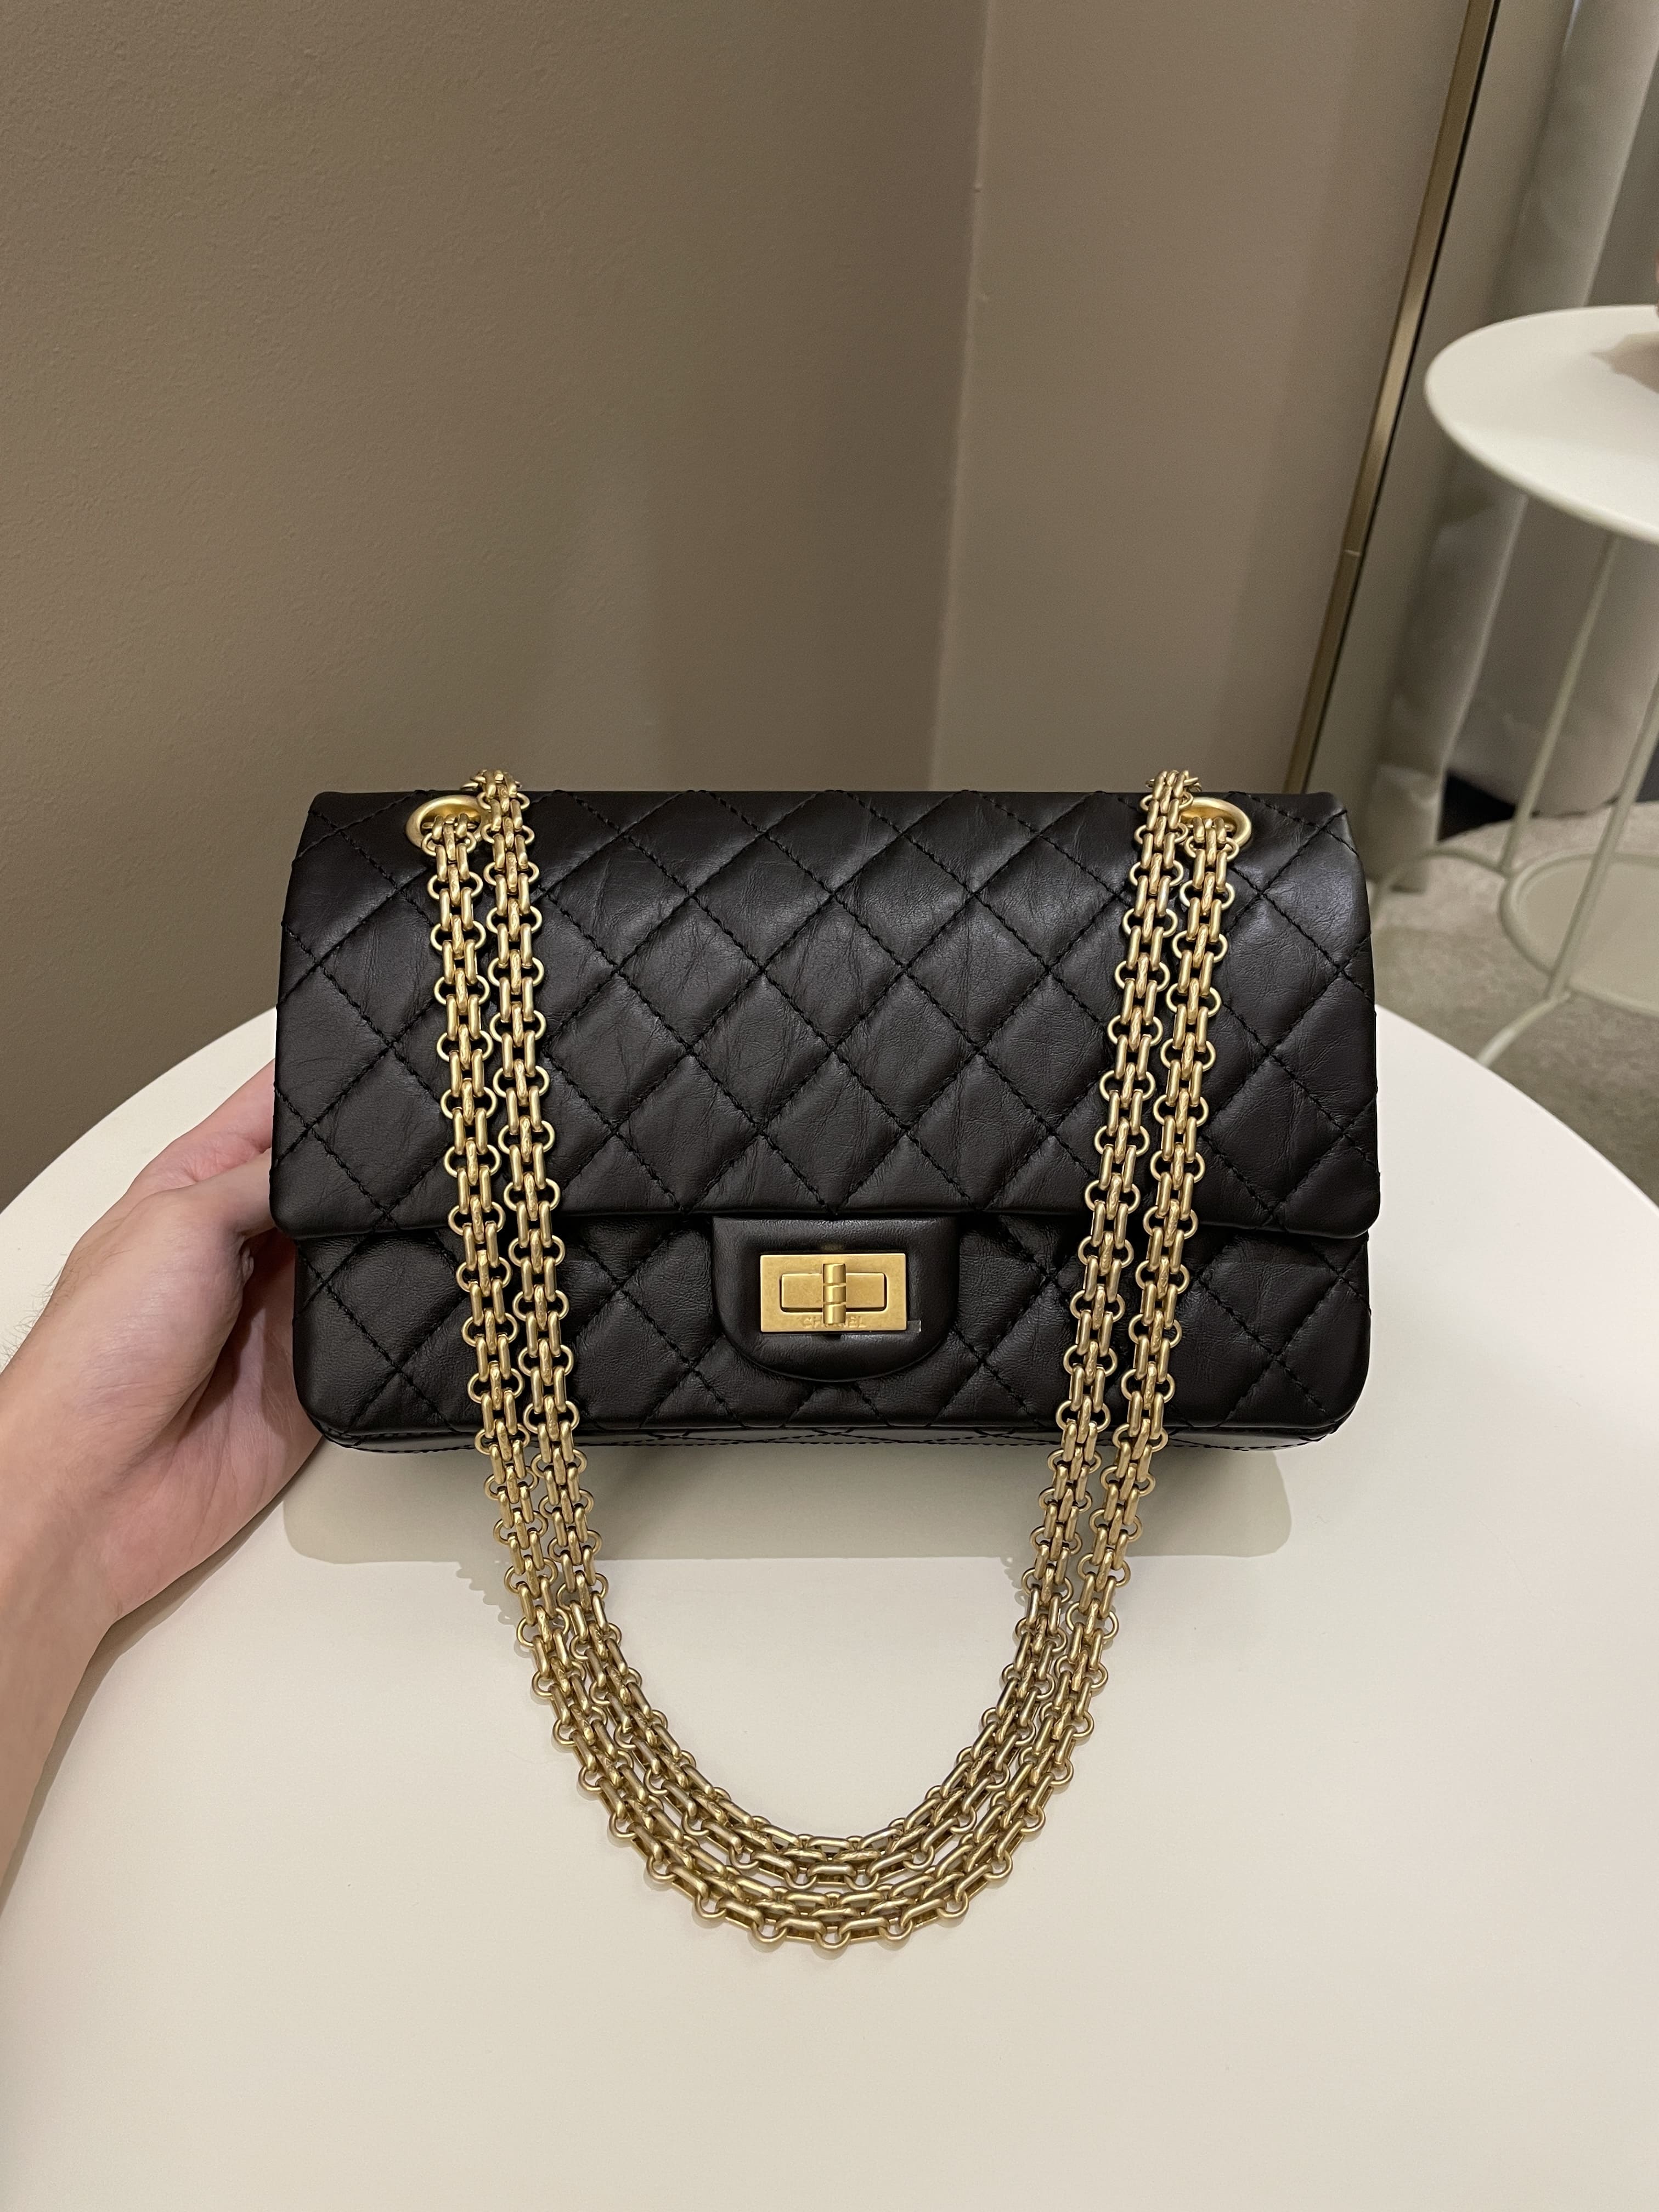 Chanel 2.55 Black Aged Calfskin Leather Double Flap Chain Bag